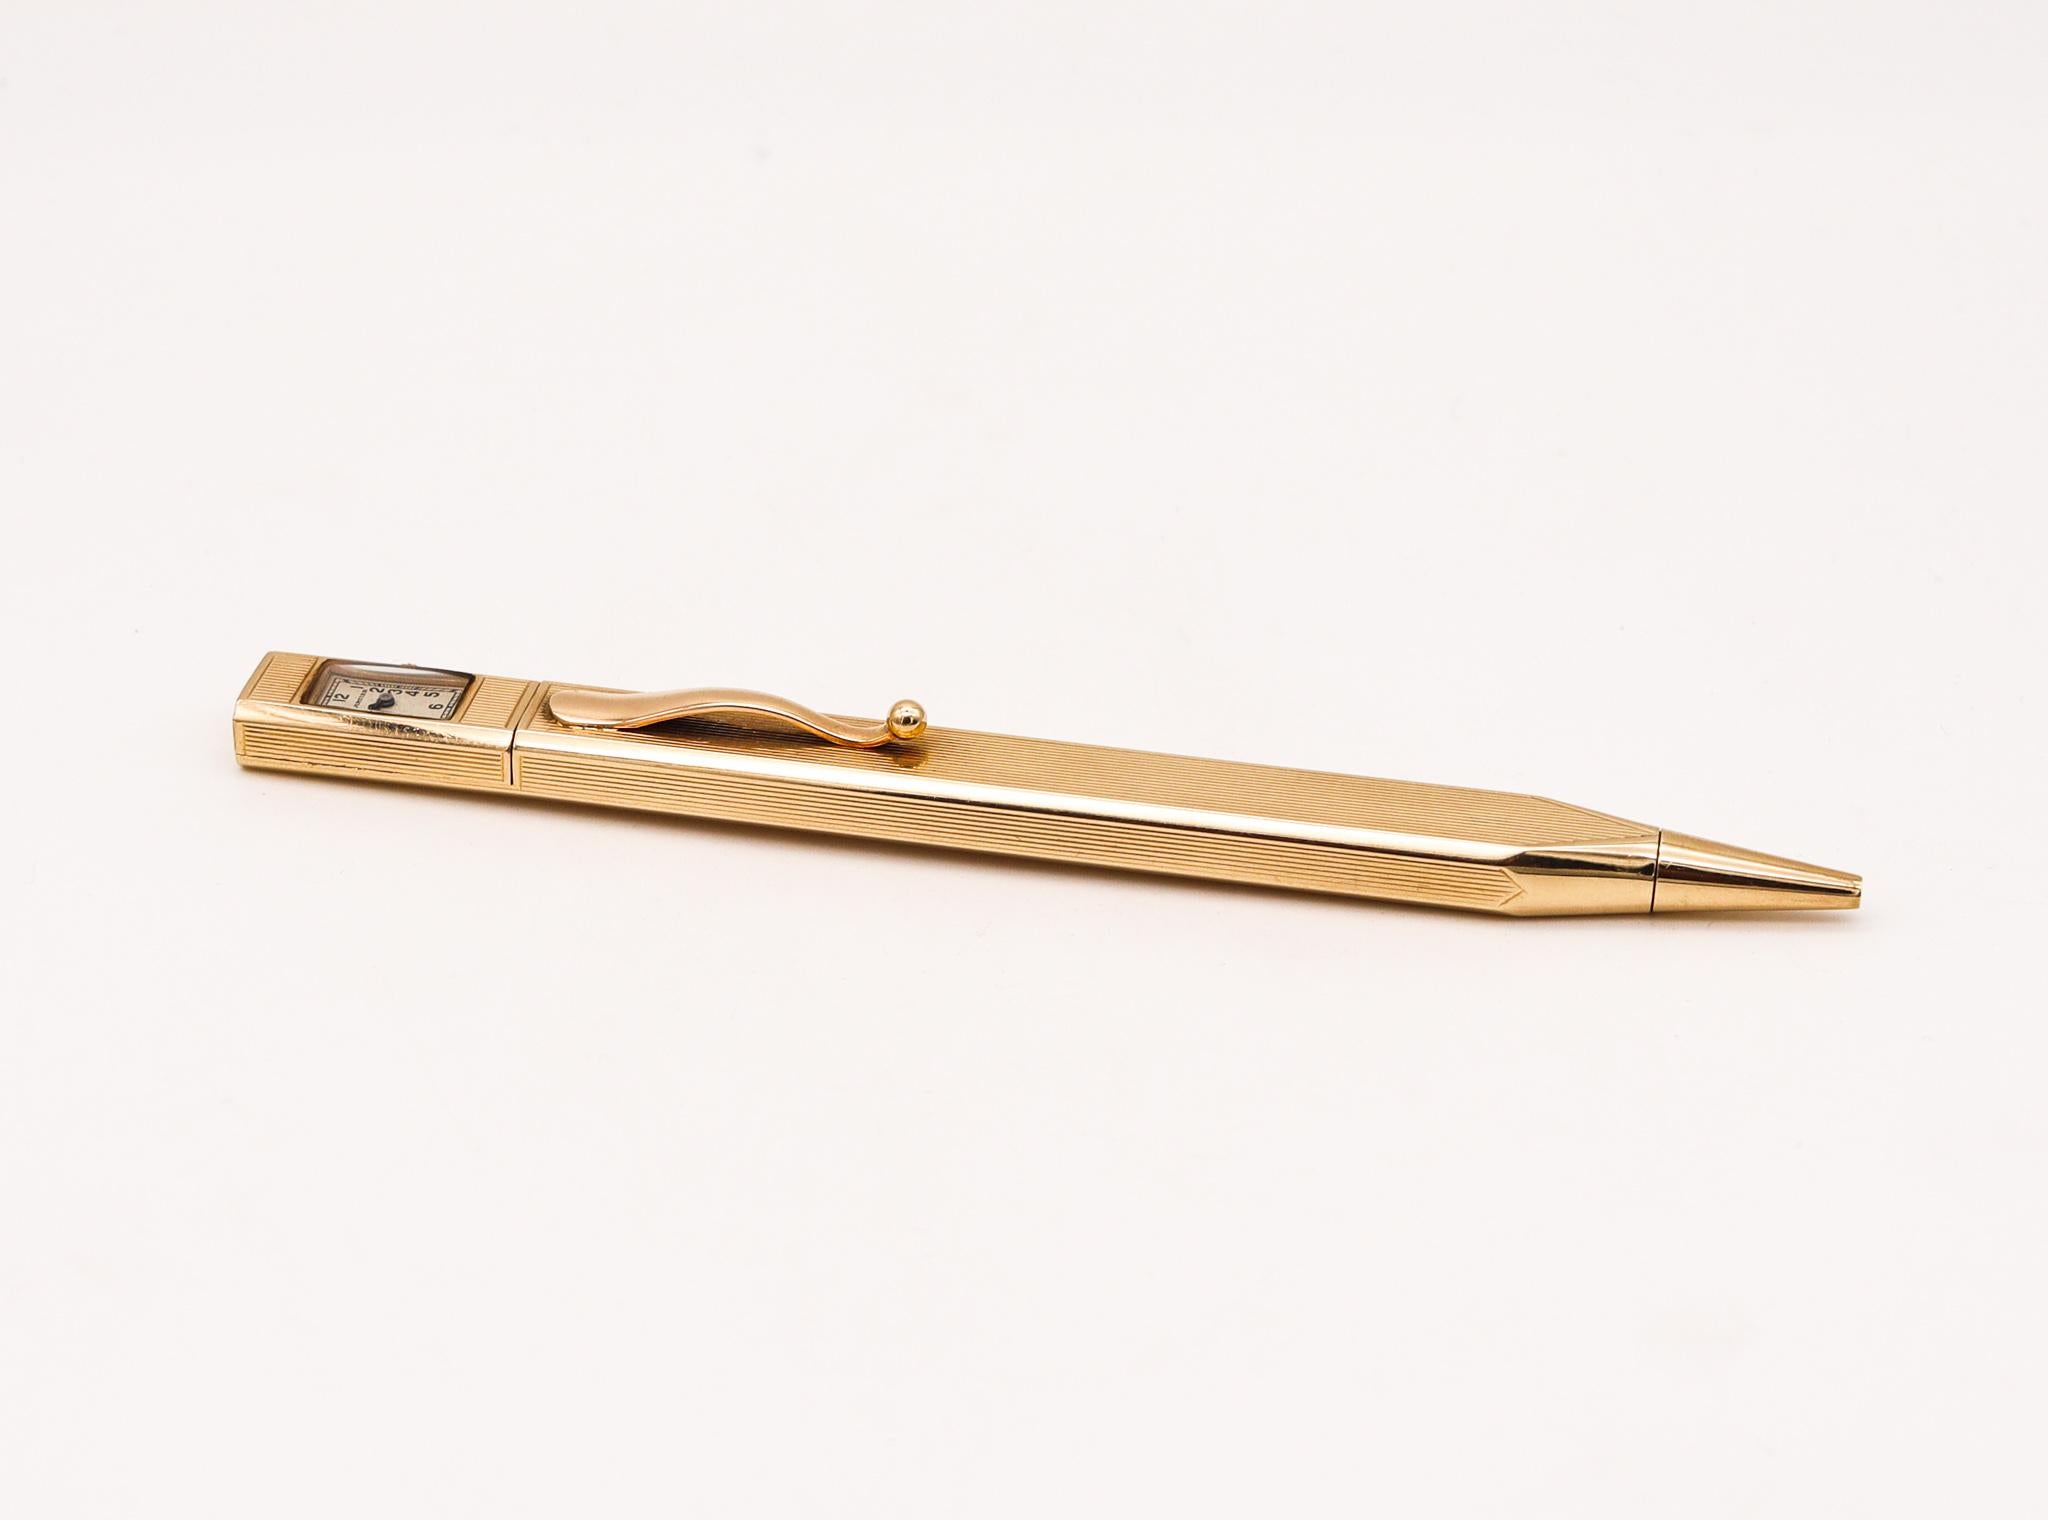 Convertible pensil-watch designed by Cartier.

Very unusual and useful piece, created in Paris France by the iconic house of Cartier, during the late art deco period, back in the 1930's. This is a convertible pensil and a watch, crafted with